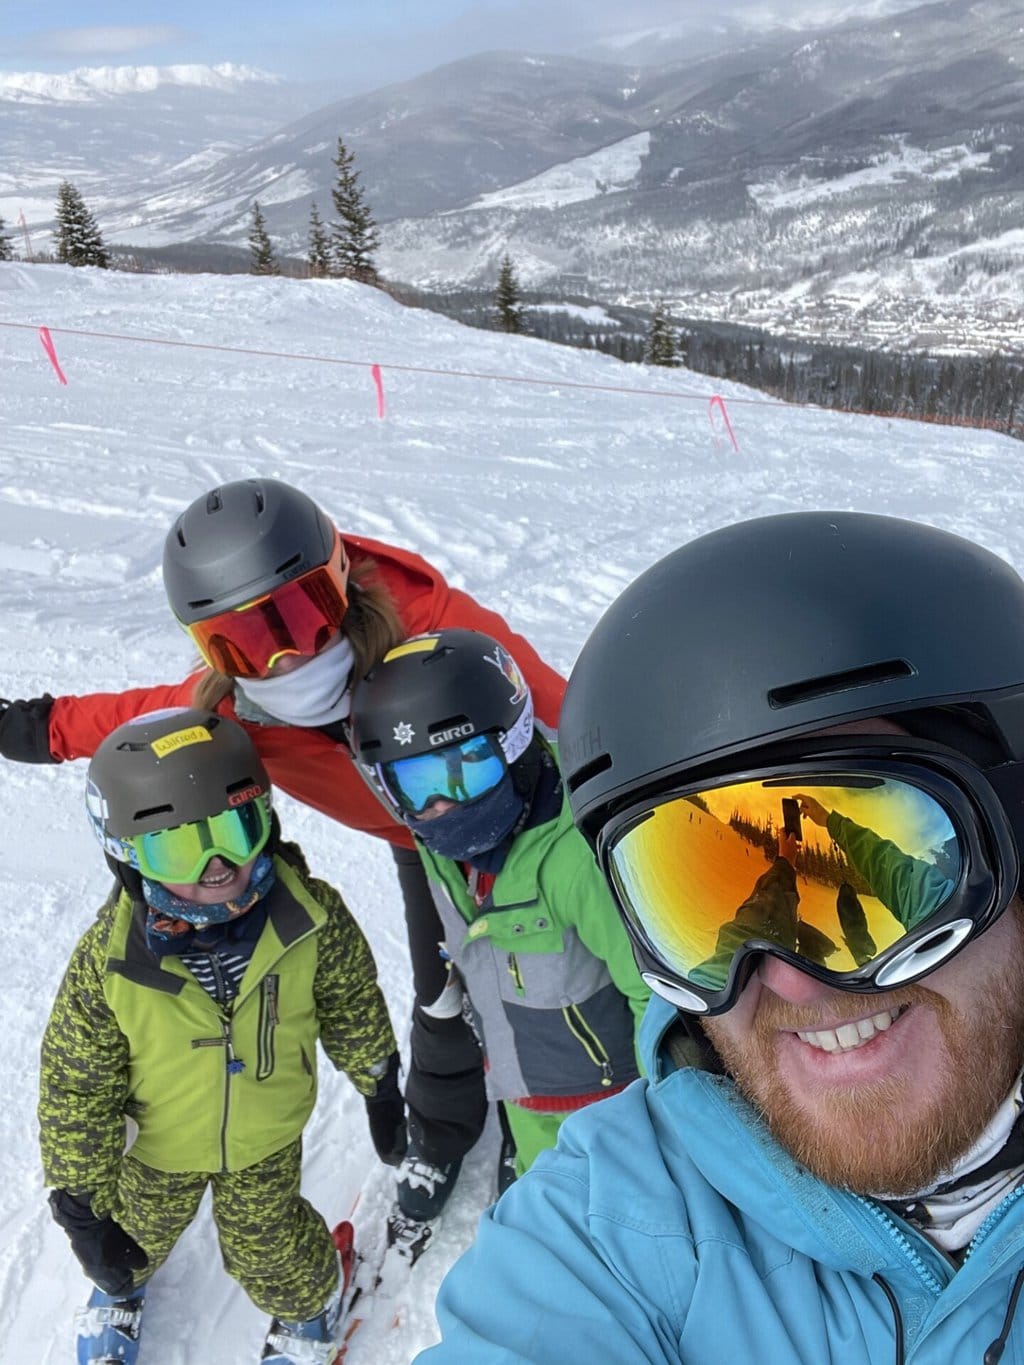 Tips for skiing in Colorado with your family